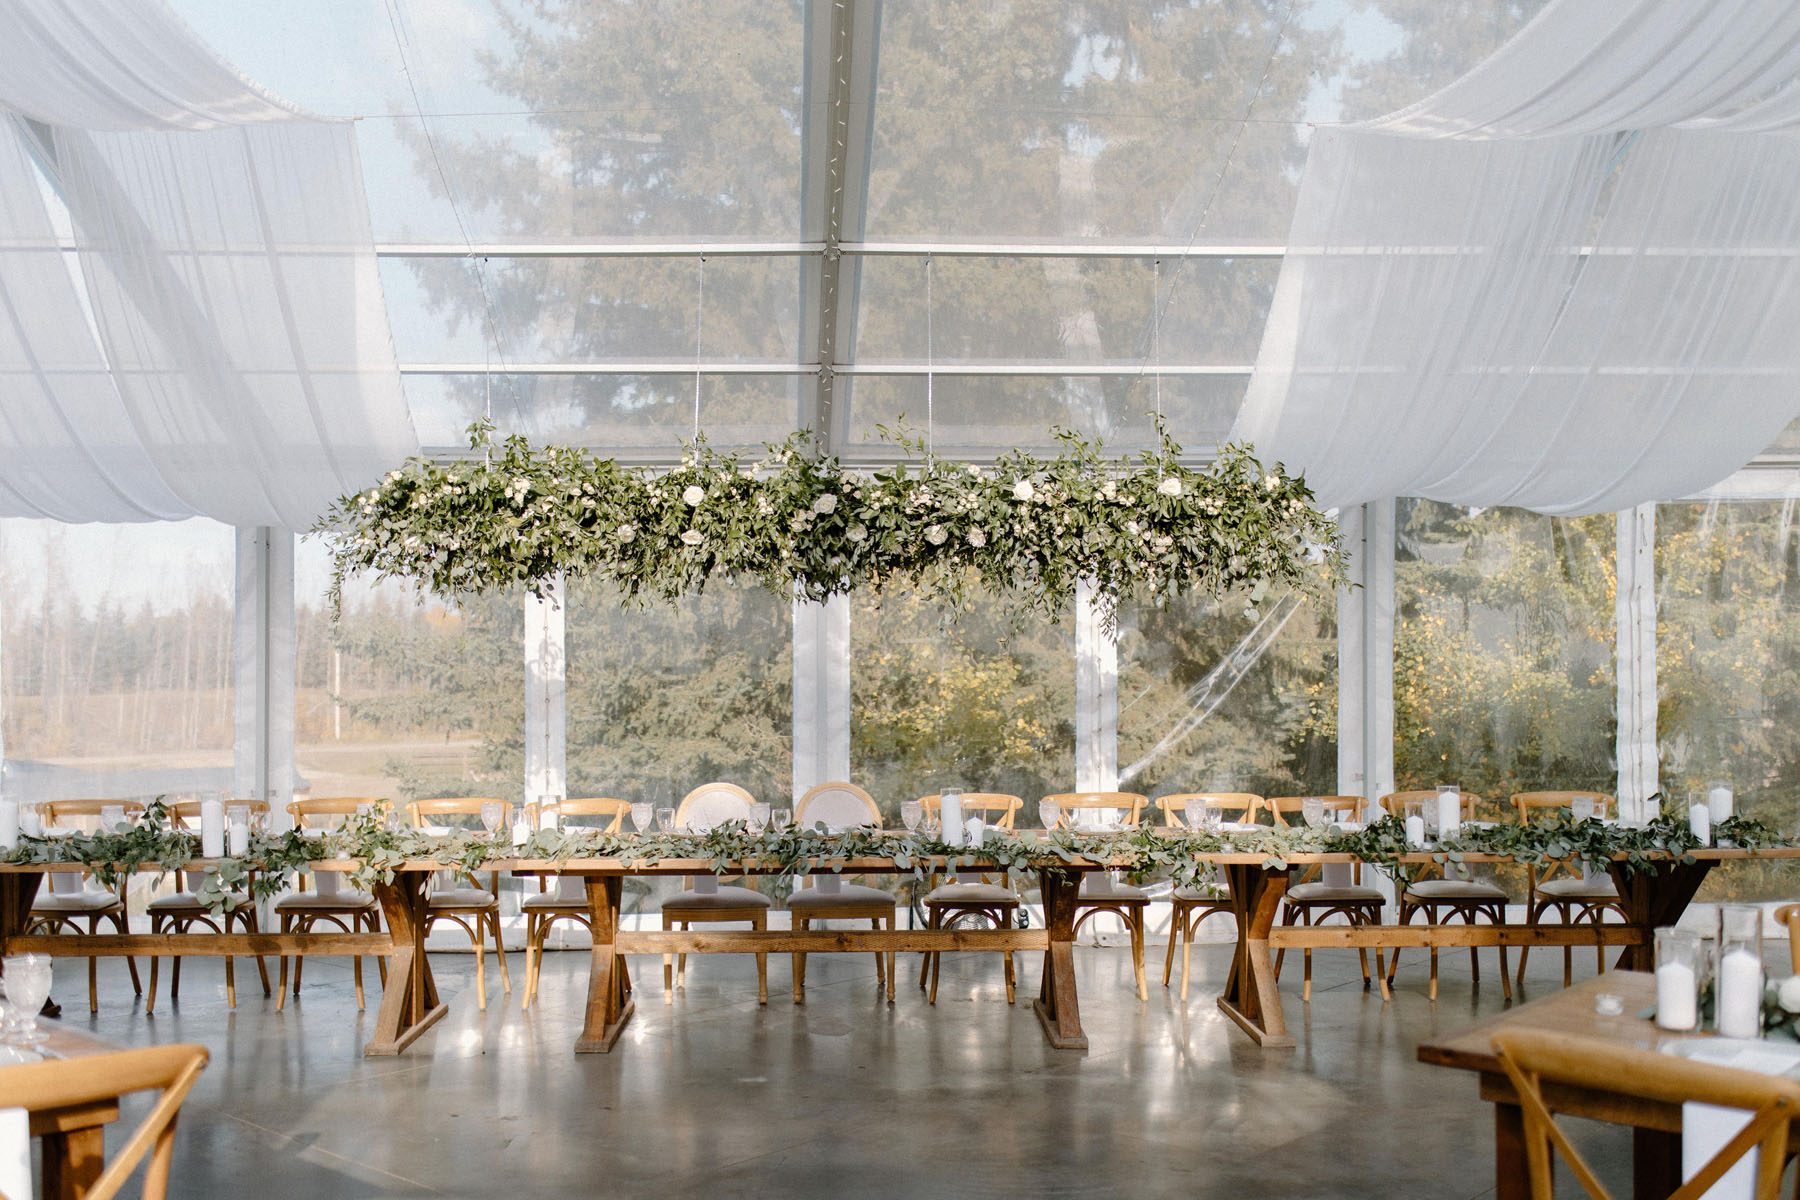 Large floral chandeliers hanging over the head table decorated with eucalyptus leaves